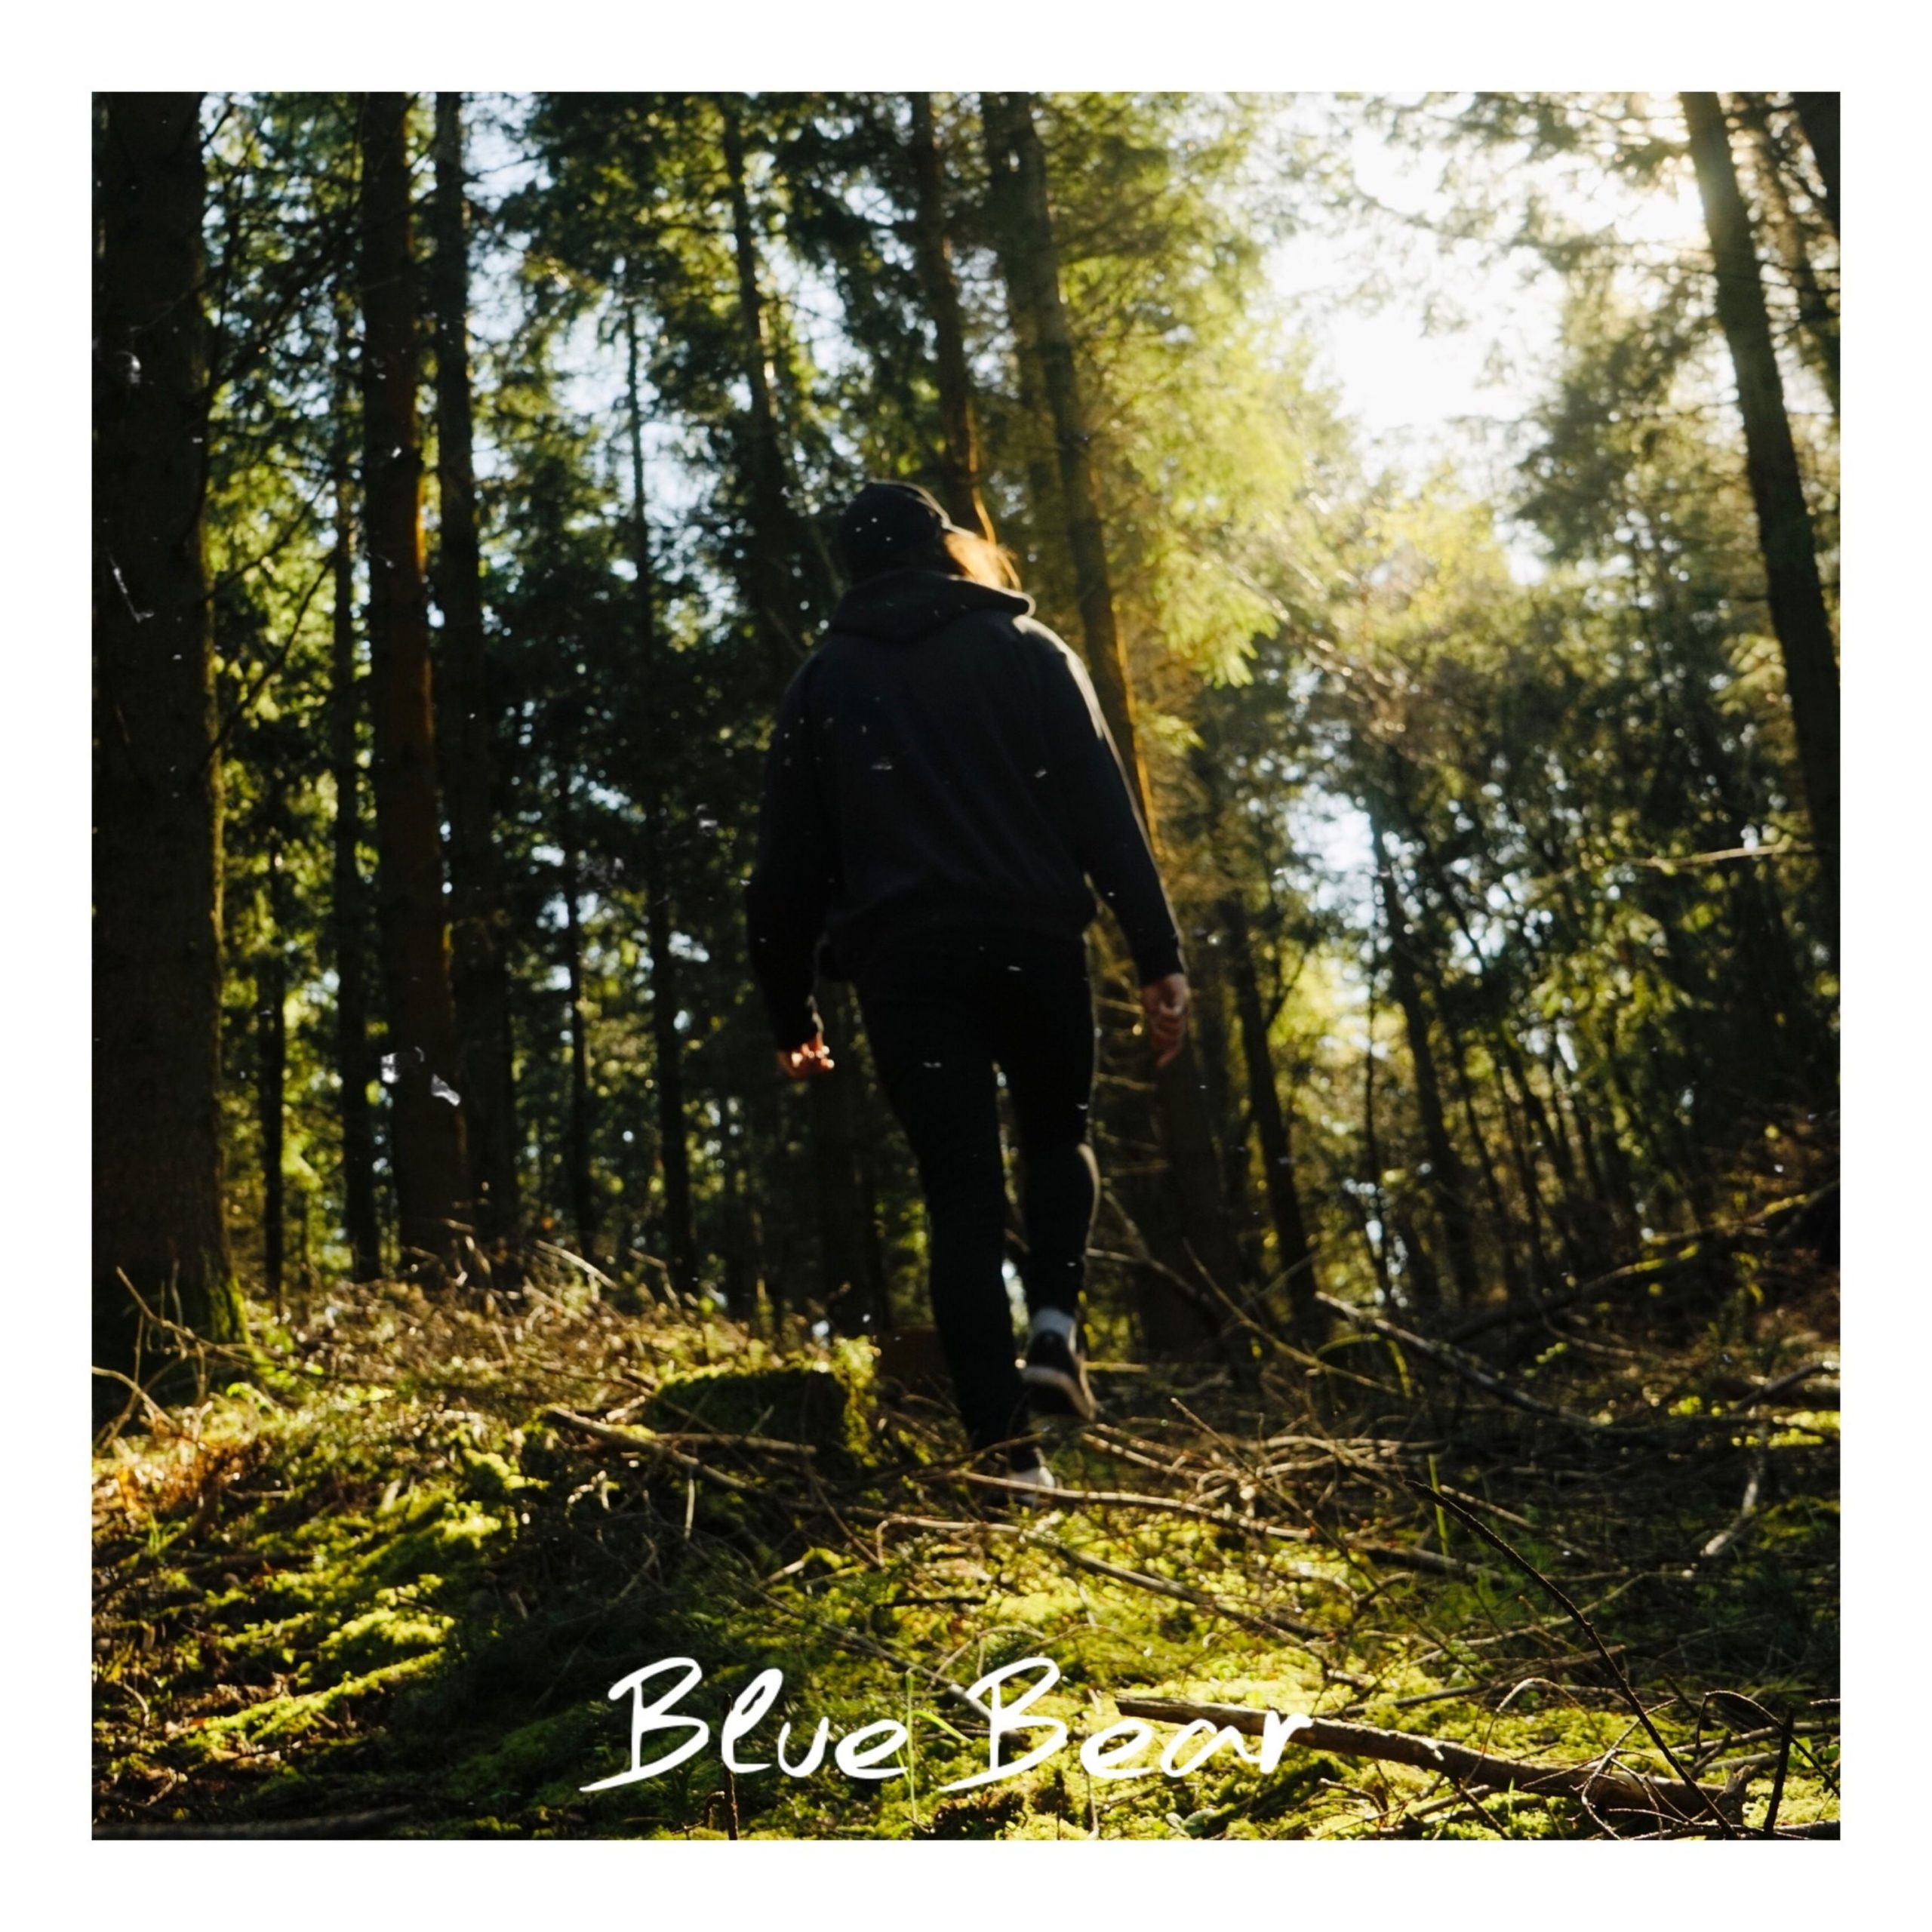 blue bear - taylor t - UK - indie - indie music - indie rock - new music - music blog - wolf in a suit - wolfinasuit - wolf in a suit blog - wolf in a suit music blog